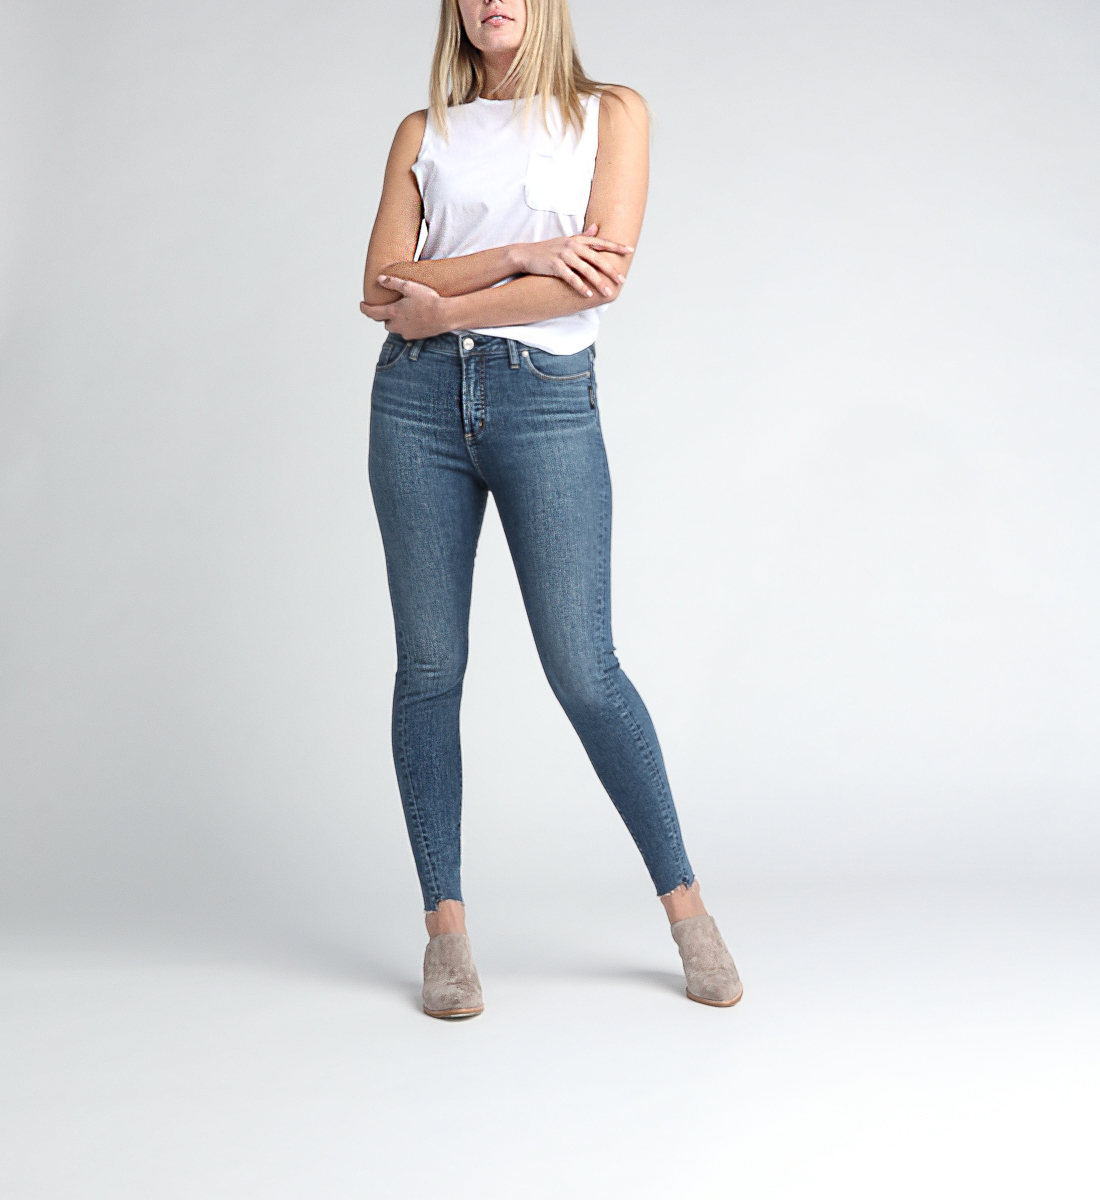 silver high rise jeans